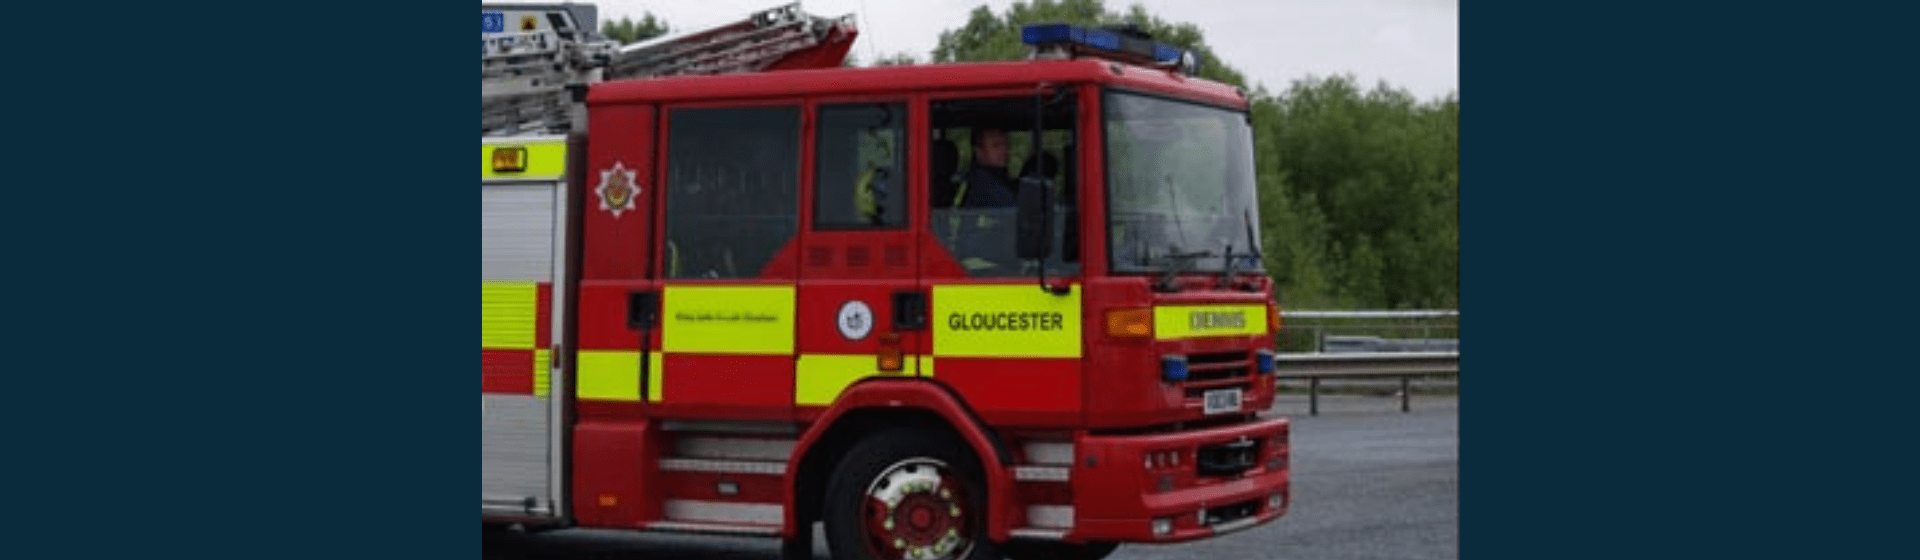 Residents receive support following house fire